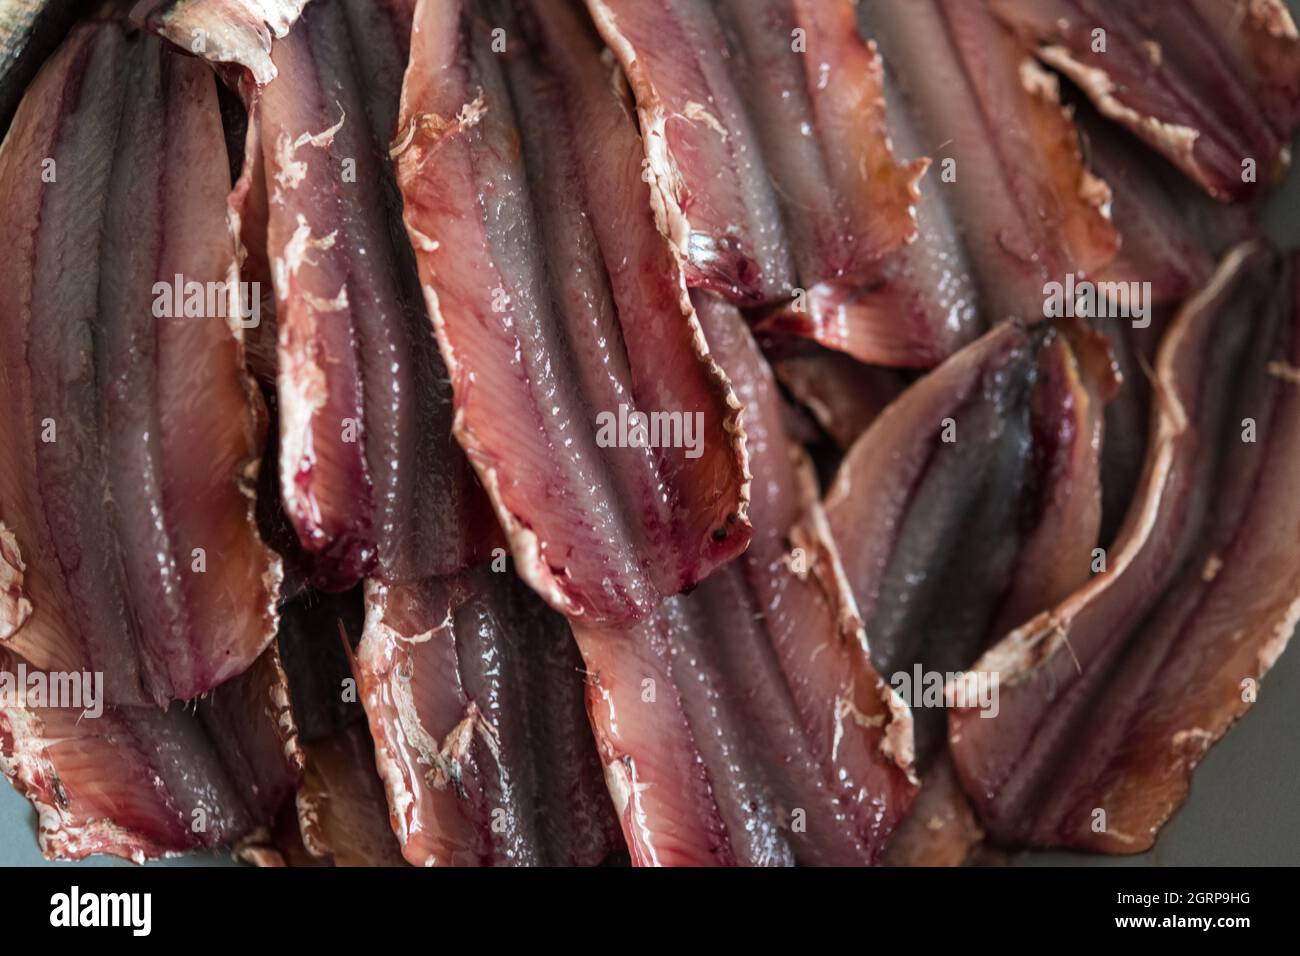 High Angle Close-up Of In Anchovies In Plate Stock Photo